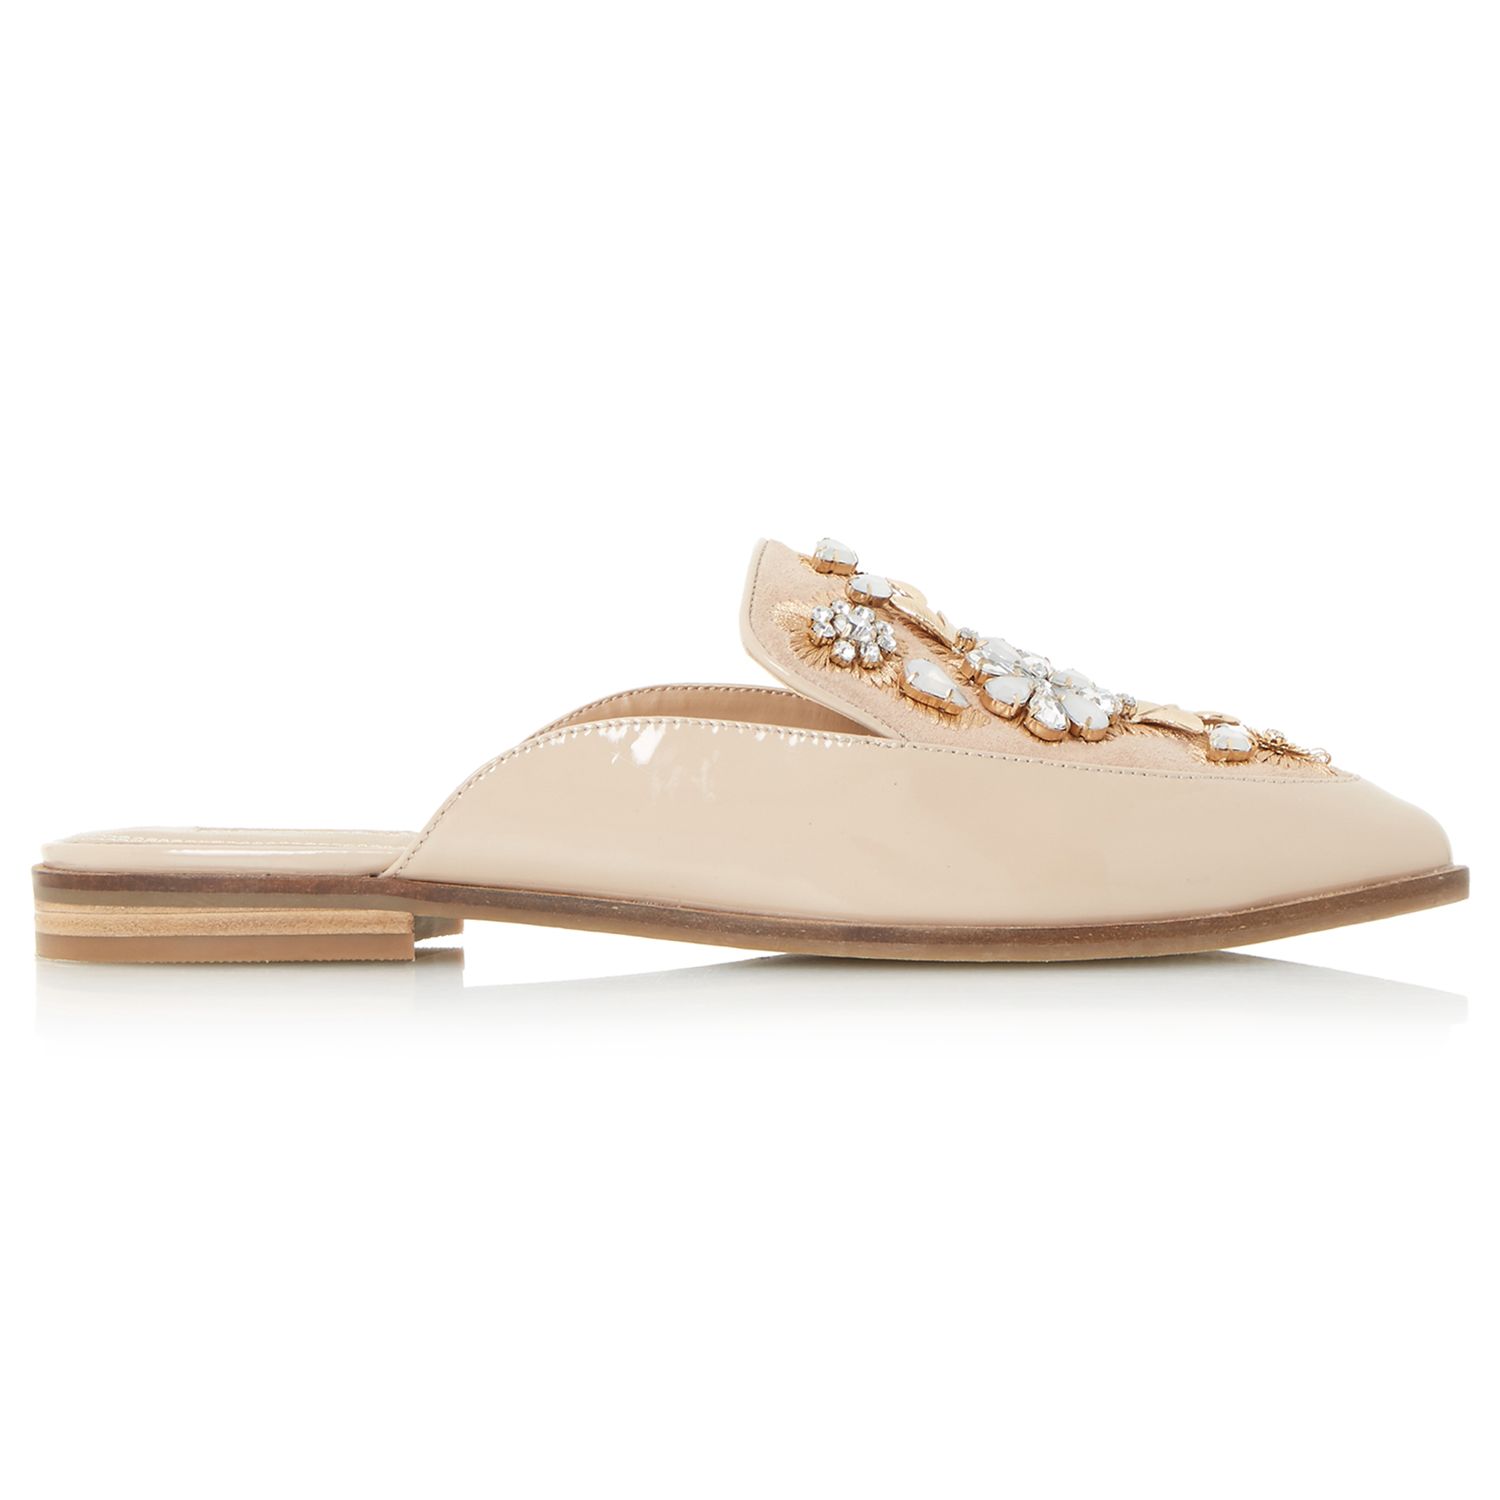 Dune Gemily Embellished Pointed Toe Mule Loafers, Nude, 5